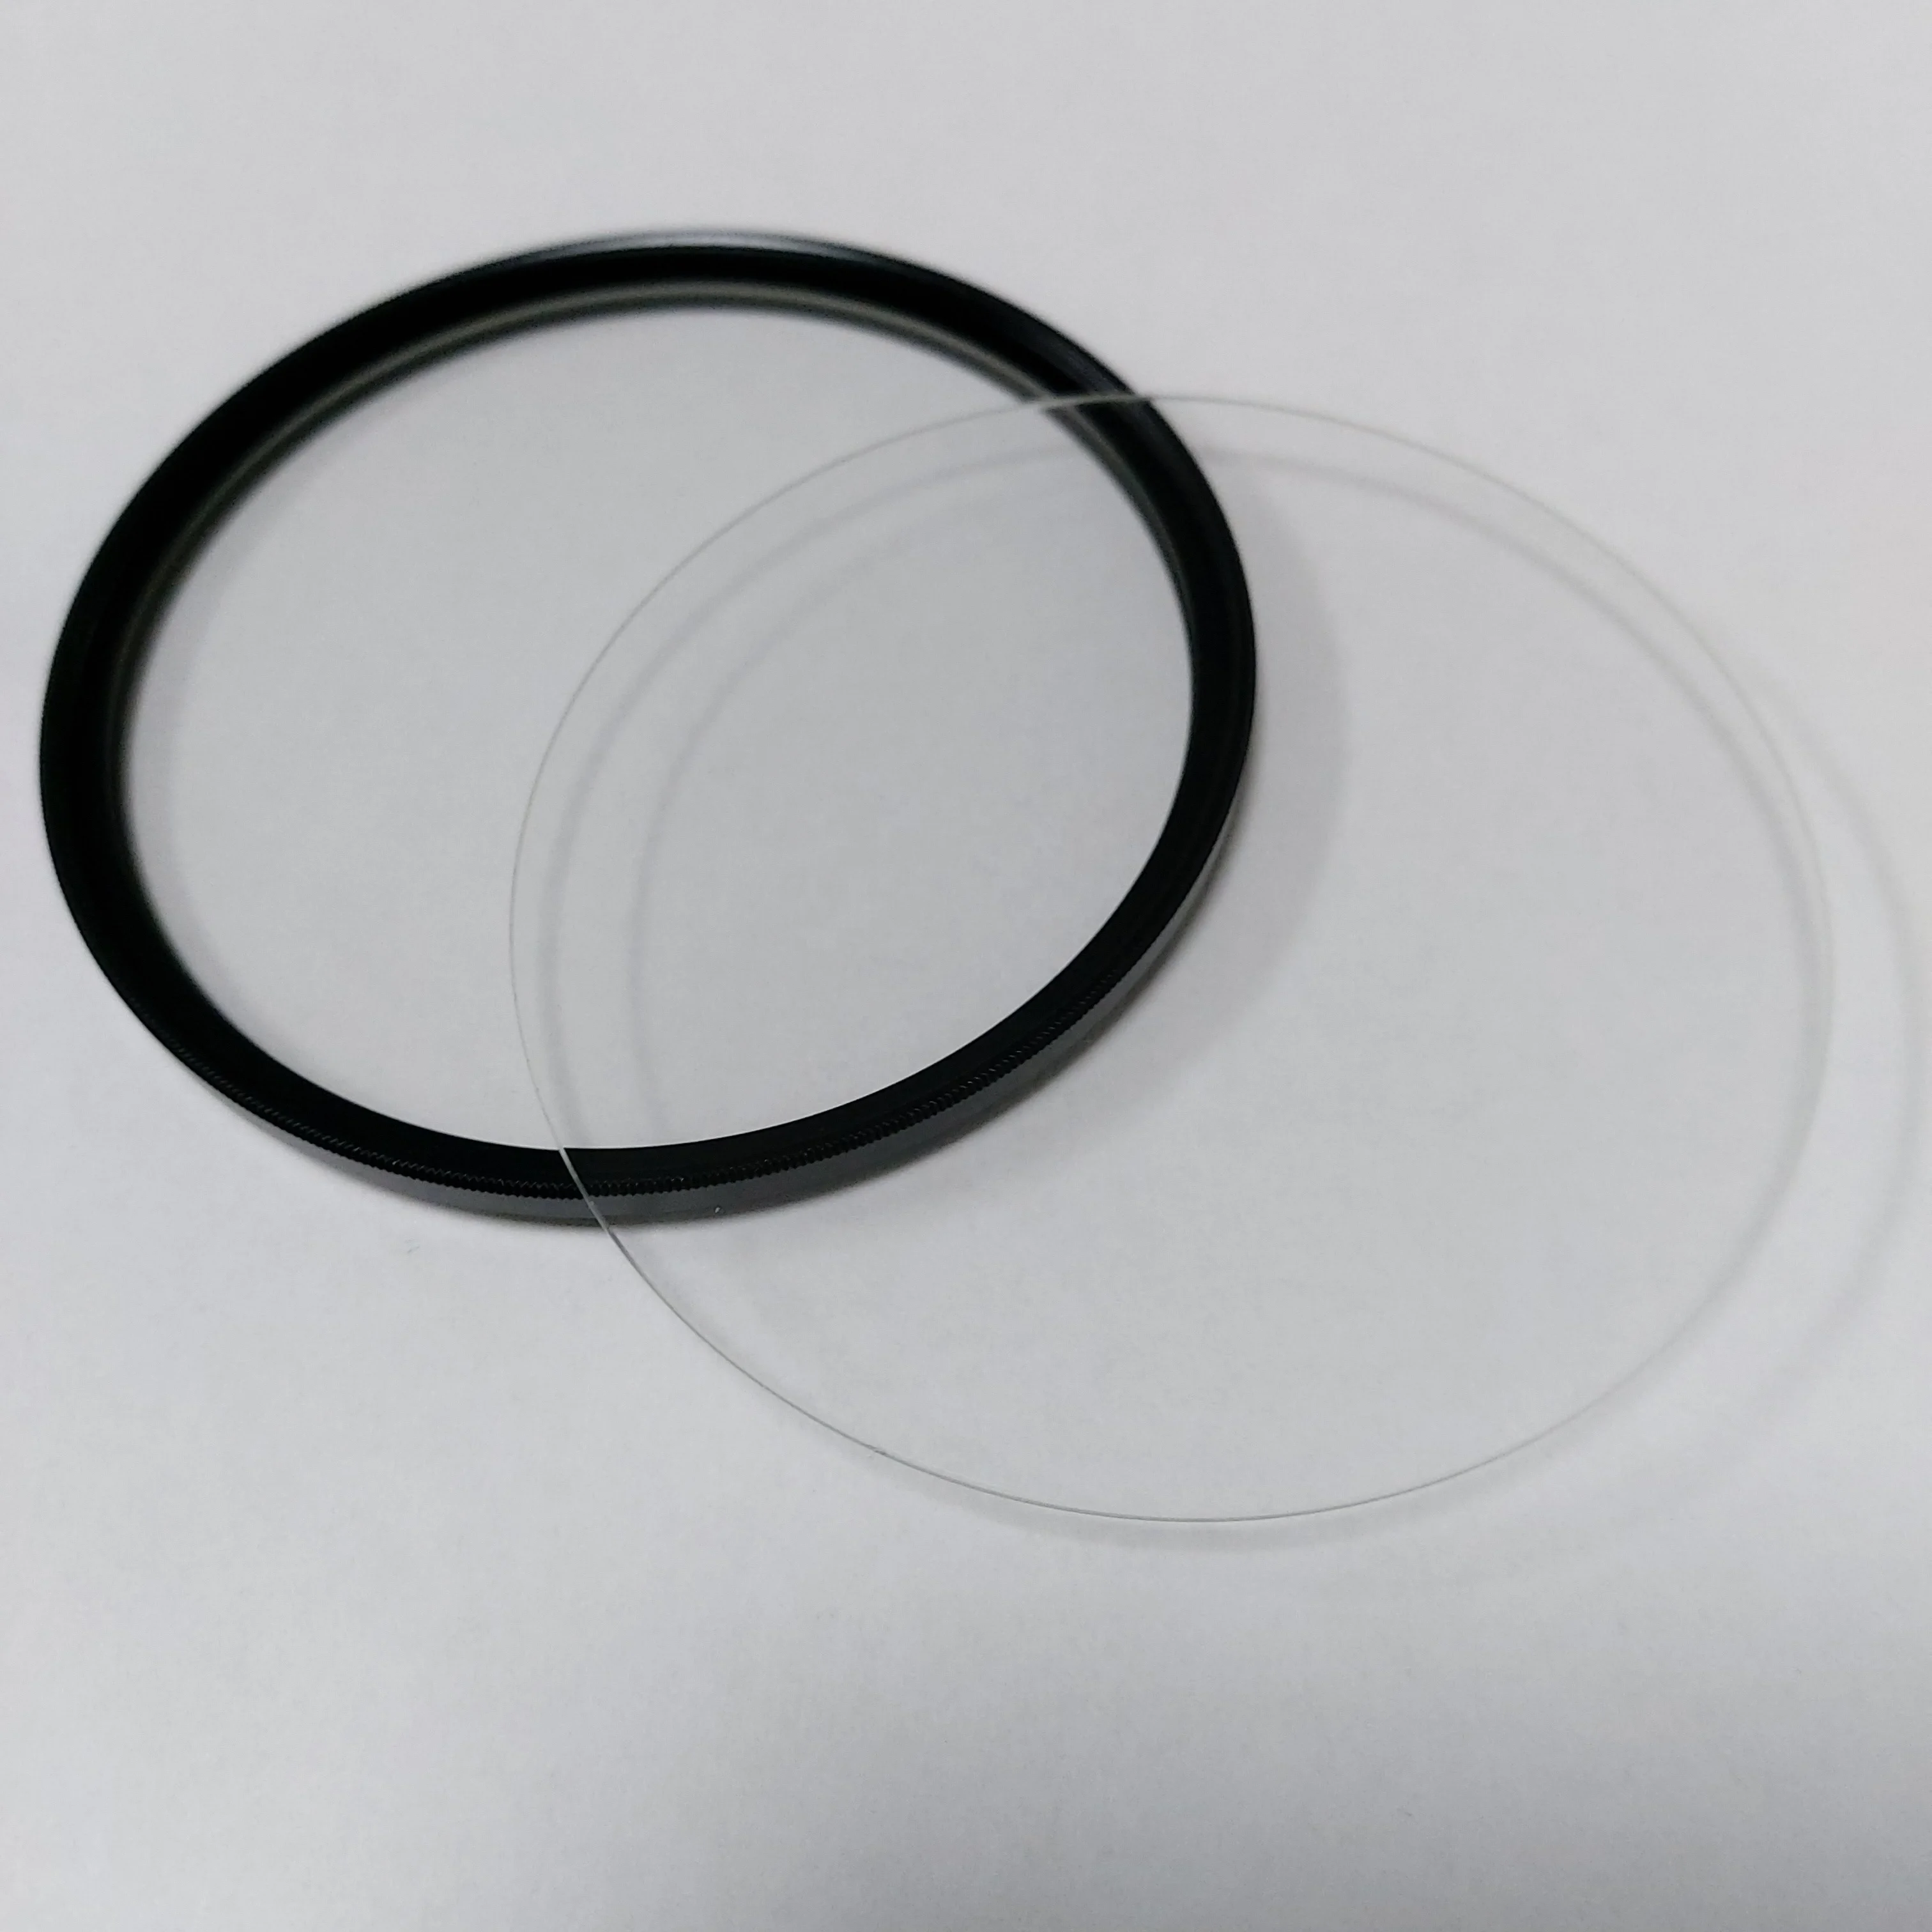 white soft 1/4 pro mist camera filter 39, 46, 58, 67,72, 95mm factory direct-sales OEM optical glass